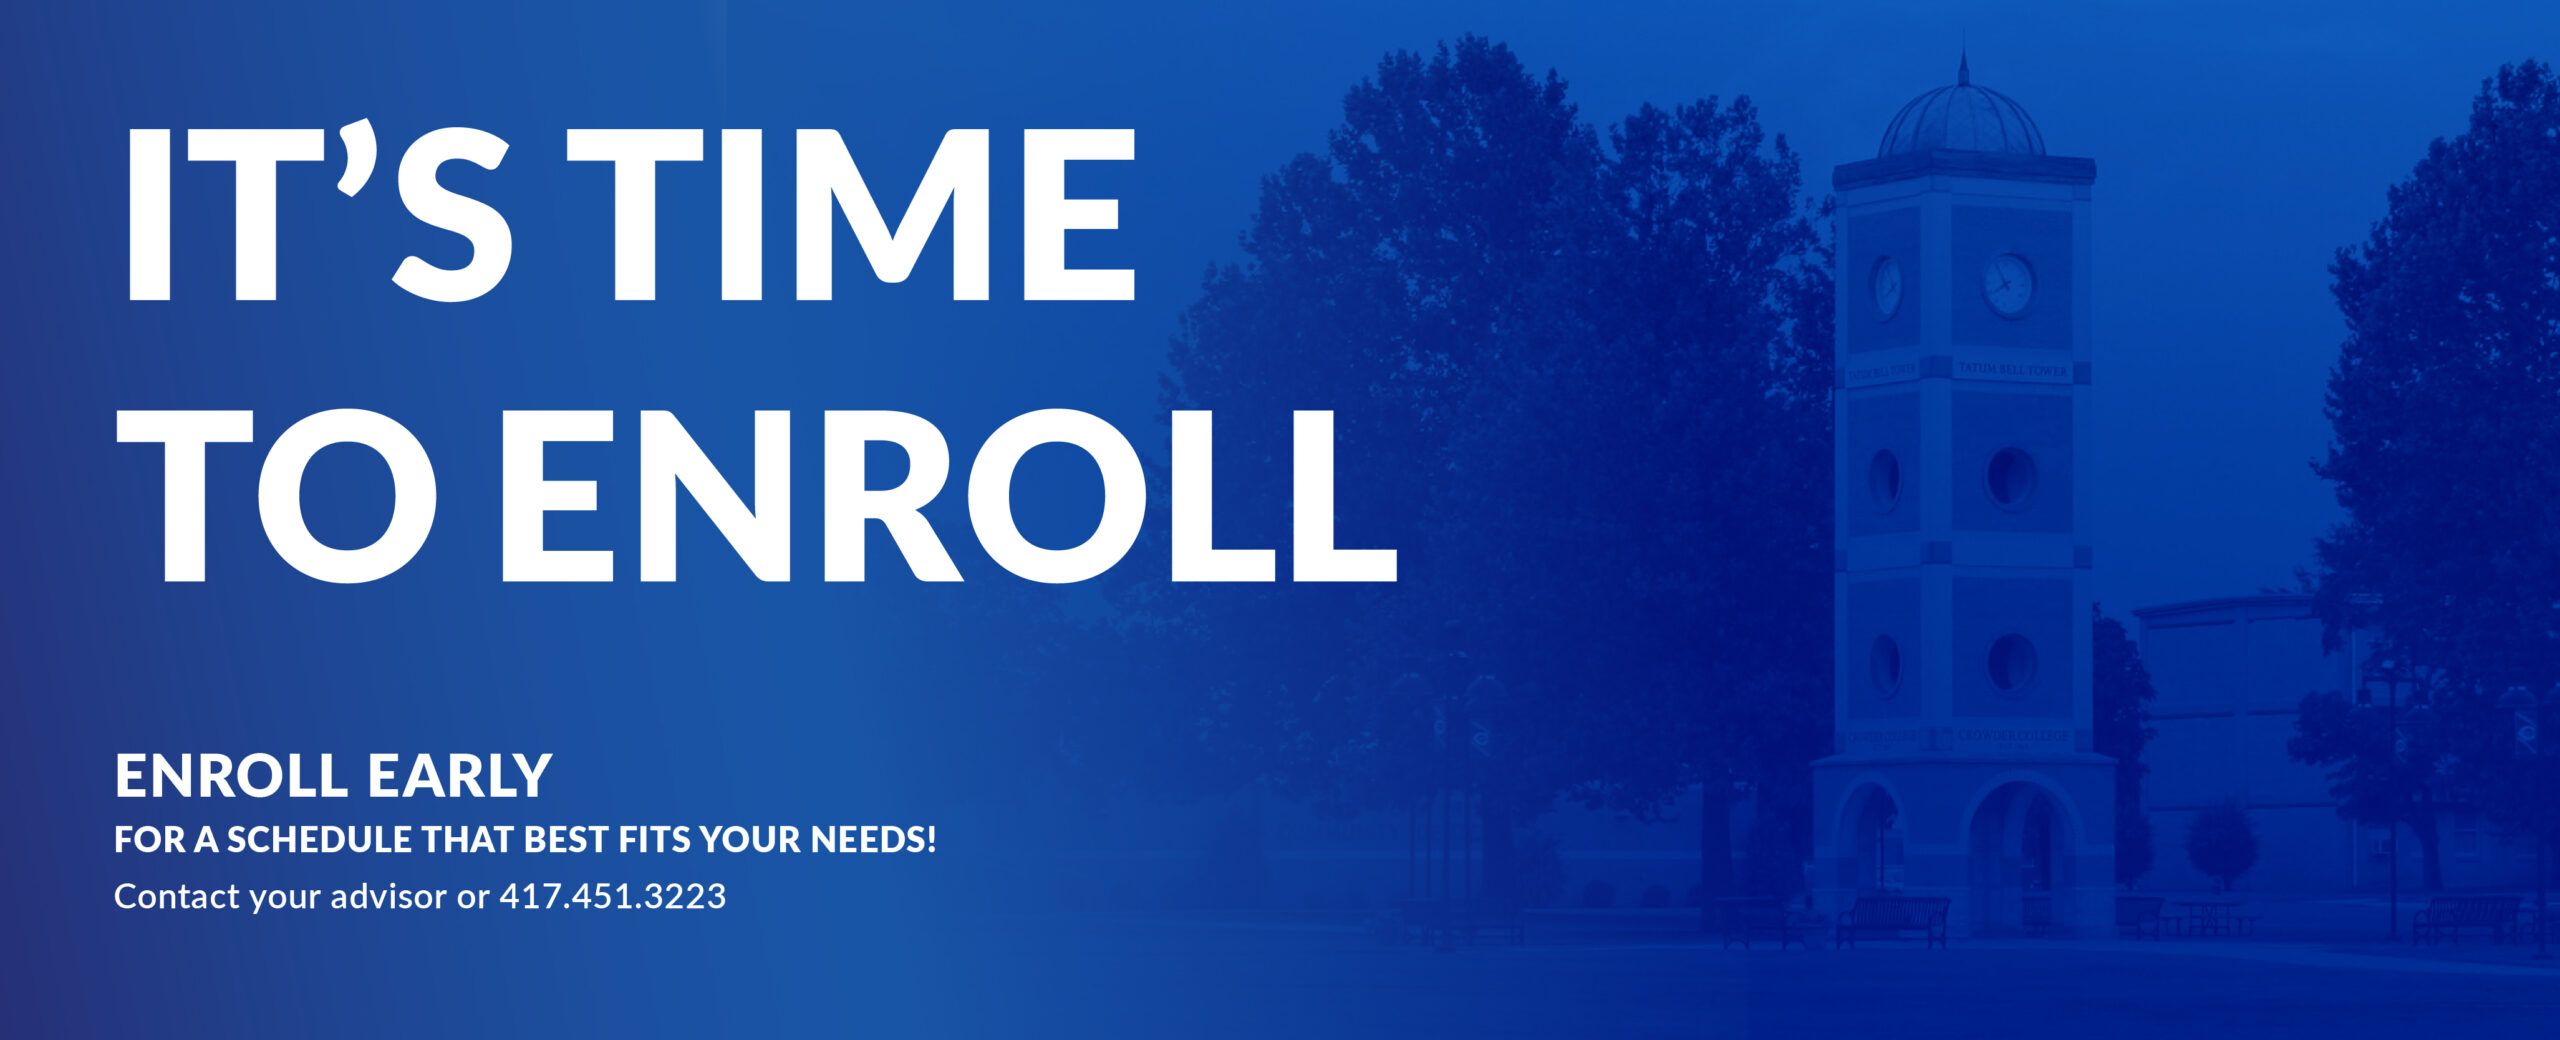 It's time to enroll. Enroll early for a schedule that best fits your needs. Contact your advisor or 417.451.3223